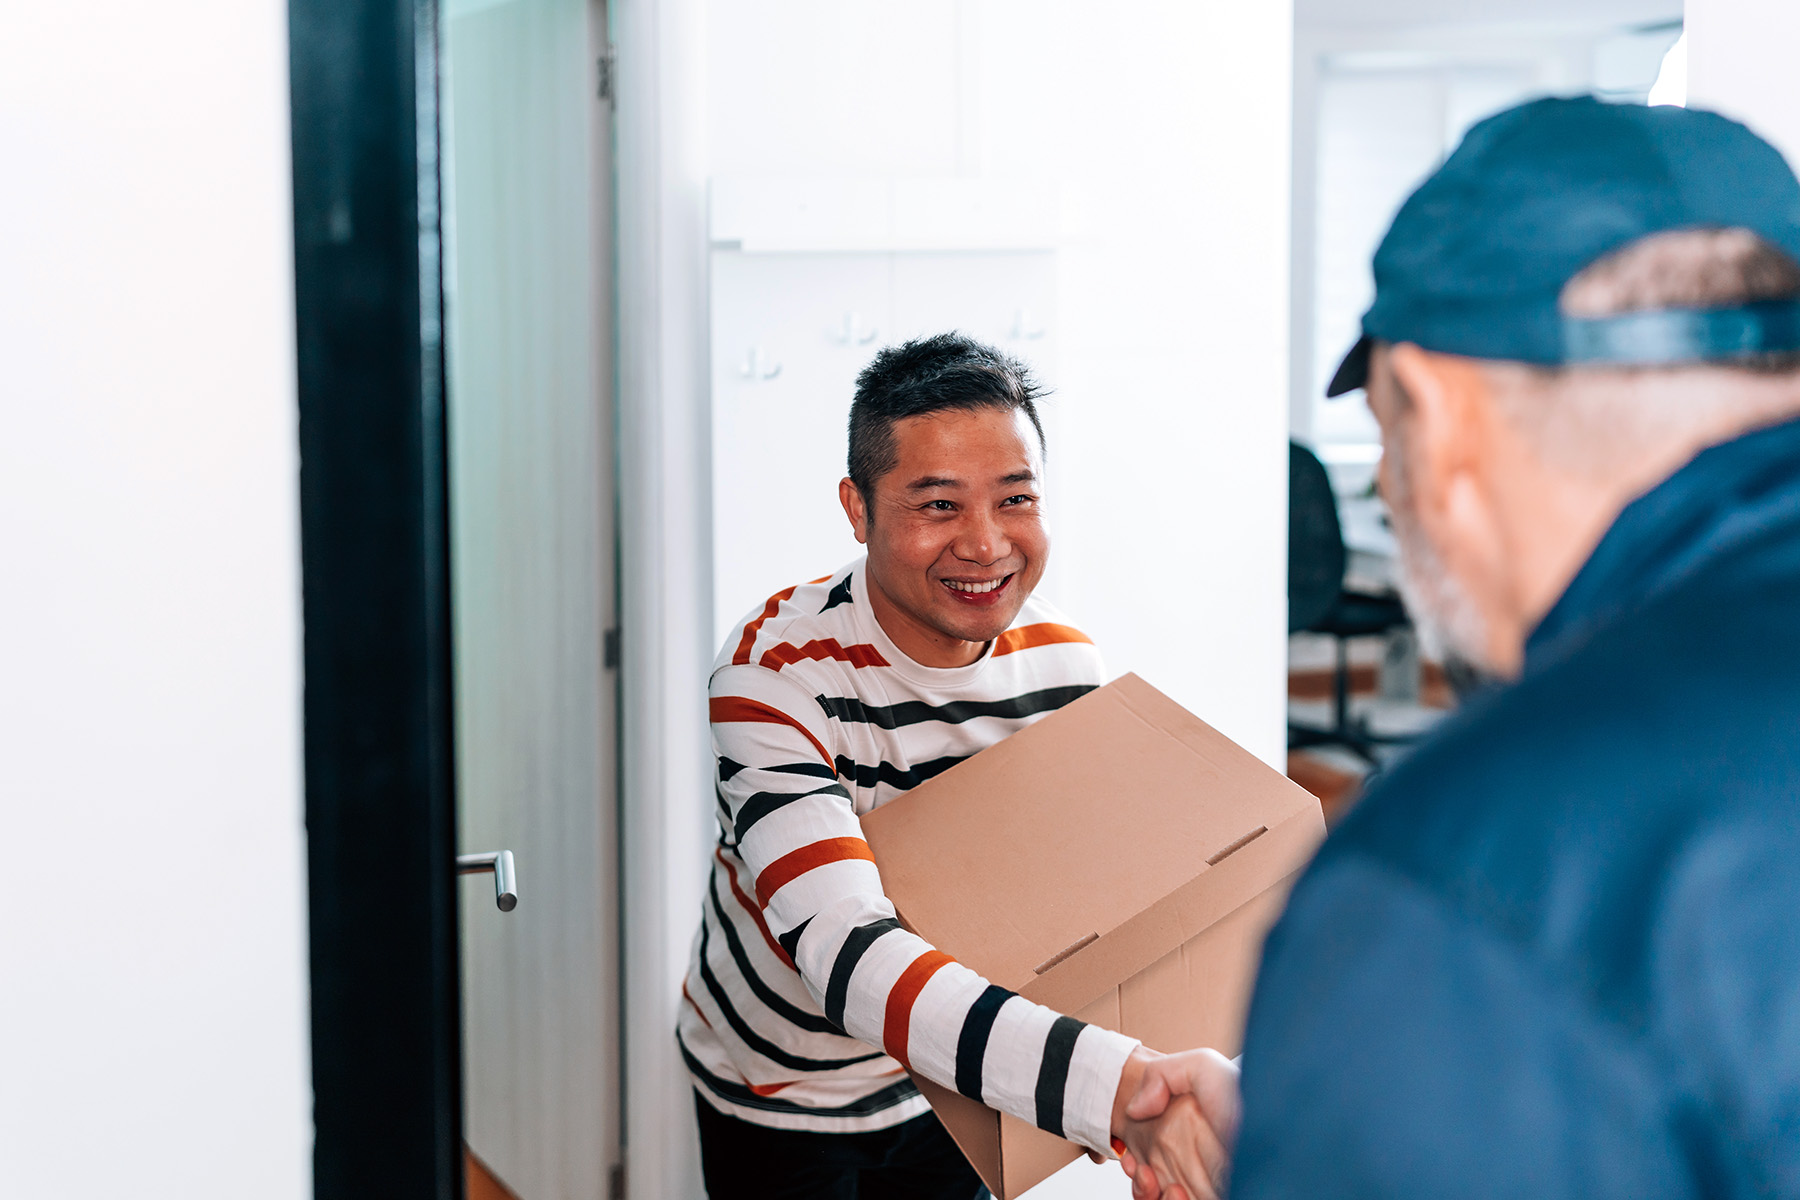 Happy man receiving a package in the mail and shaking hands with the delivery man.